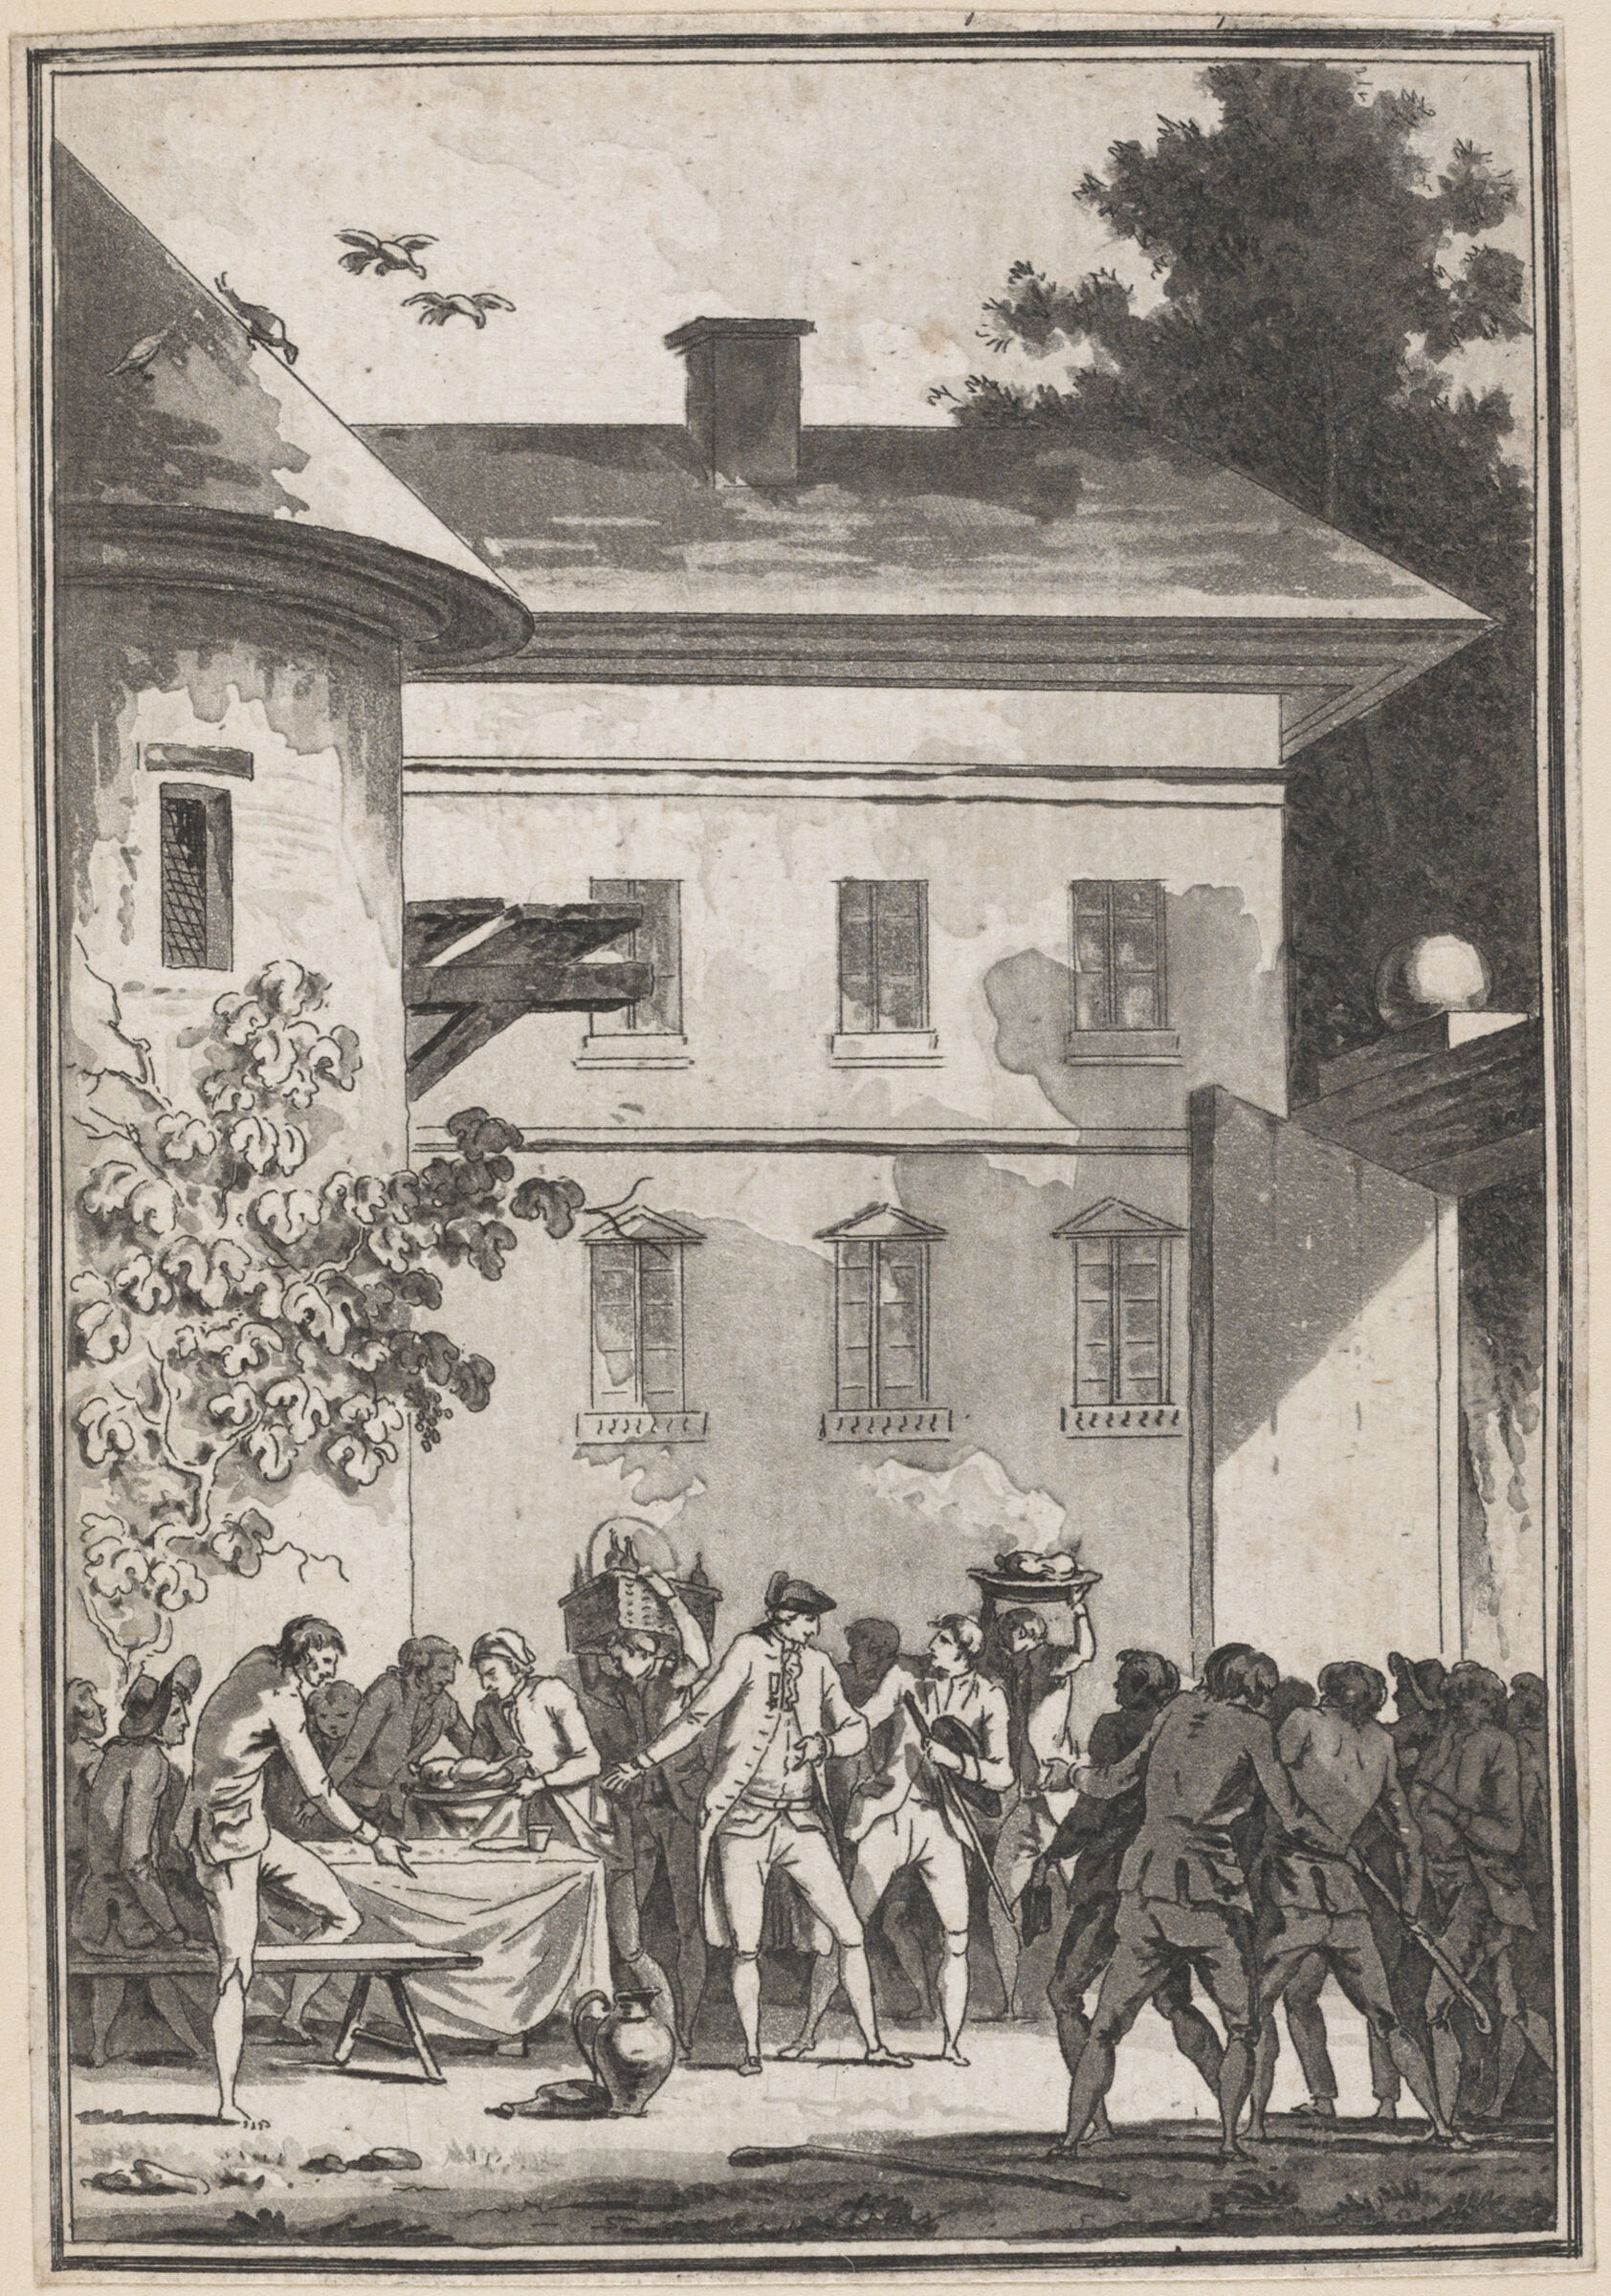 M. Walche Appeases The Angry People, Who Want To Ravage His Château In Chassenon, By Preparing Them A Meal (16-17 August 1789)